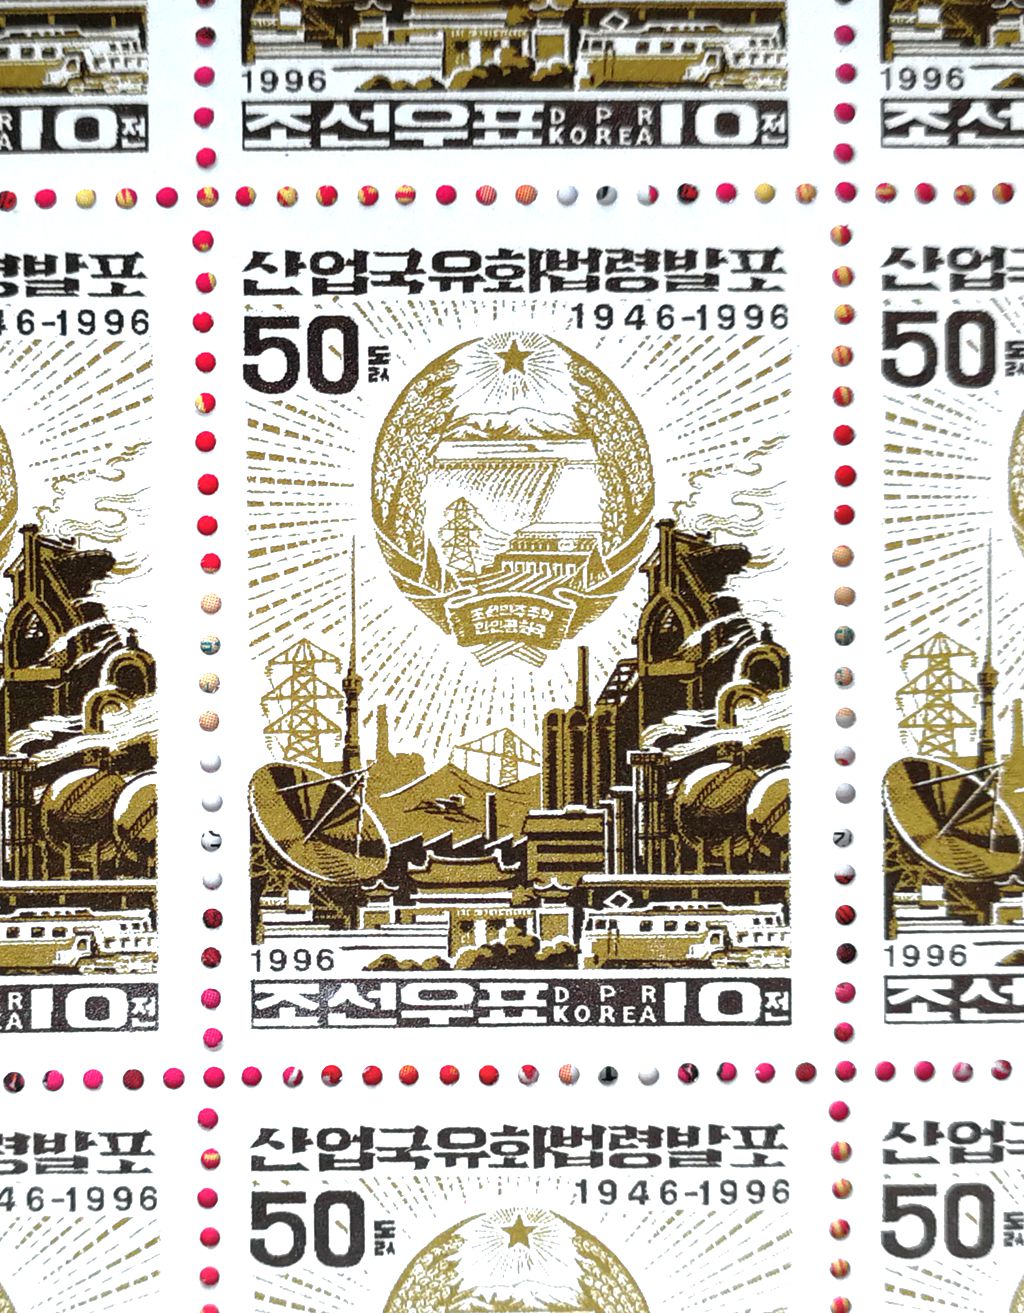 L4562, Korea "50th Anniv. of Nationalization Law", Full Sheet of 55 Pcs Stamps, 1996